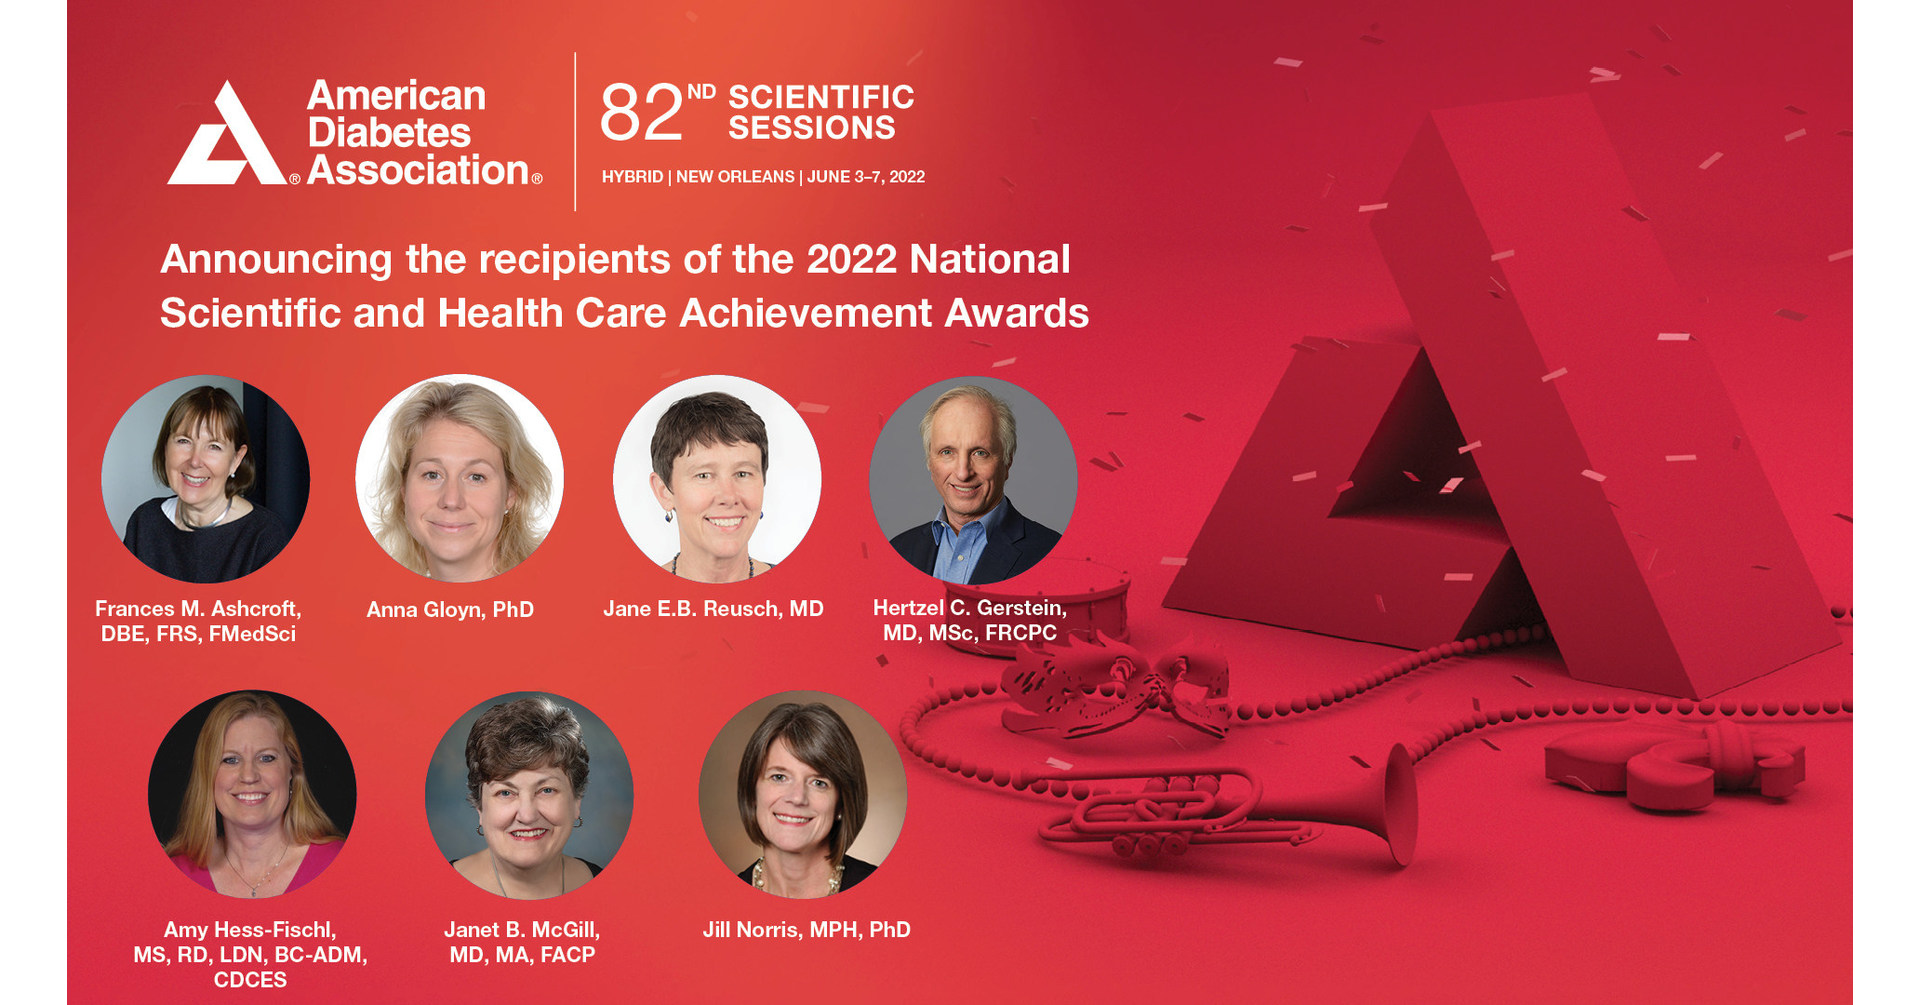 Extraordinary Leaders in Diabetes Research, Prevention, and Treatment to be Recognized at ADA’s 82nd Scientific Sessions